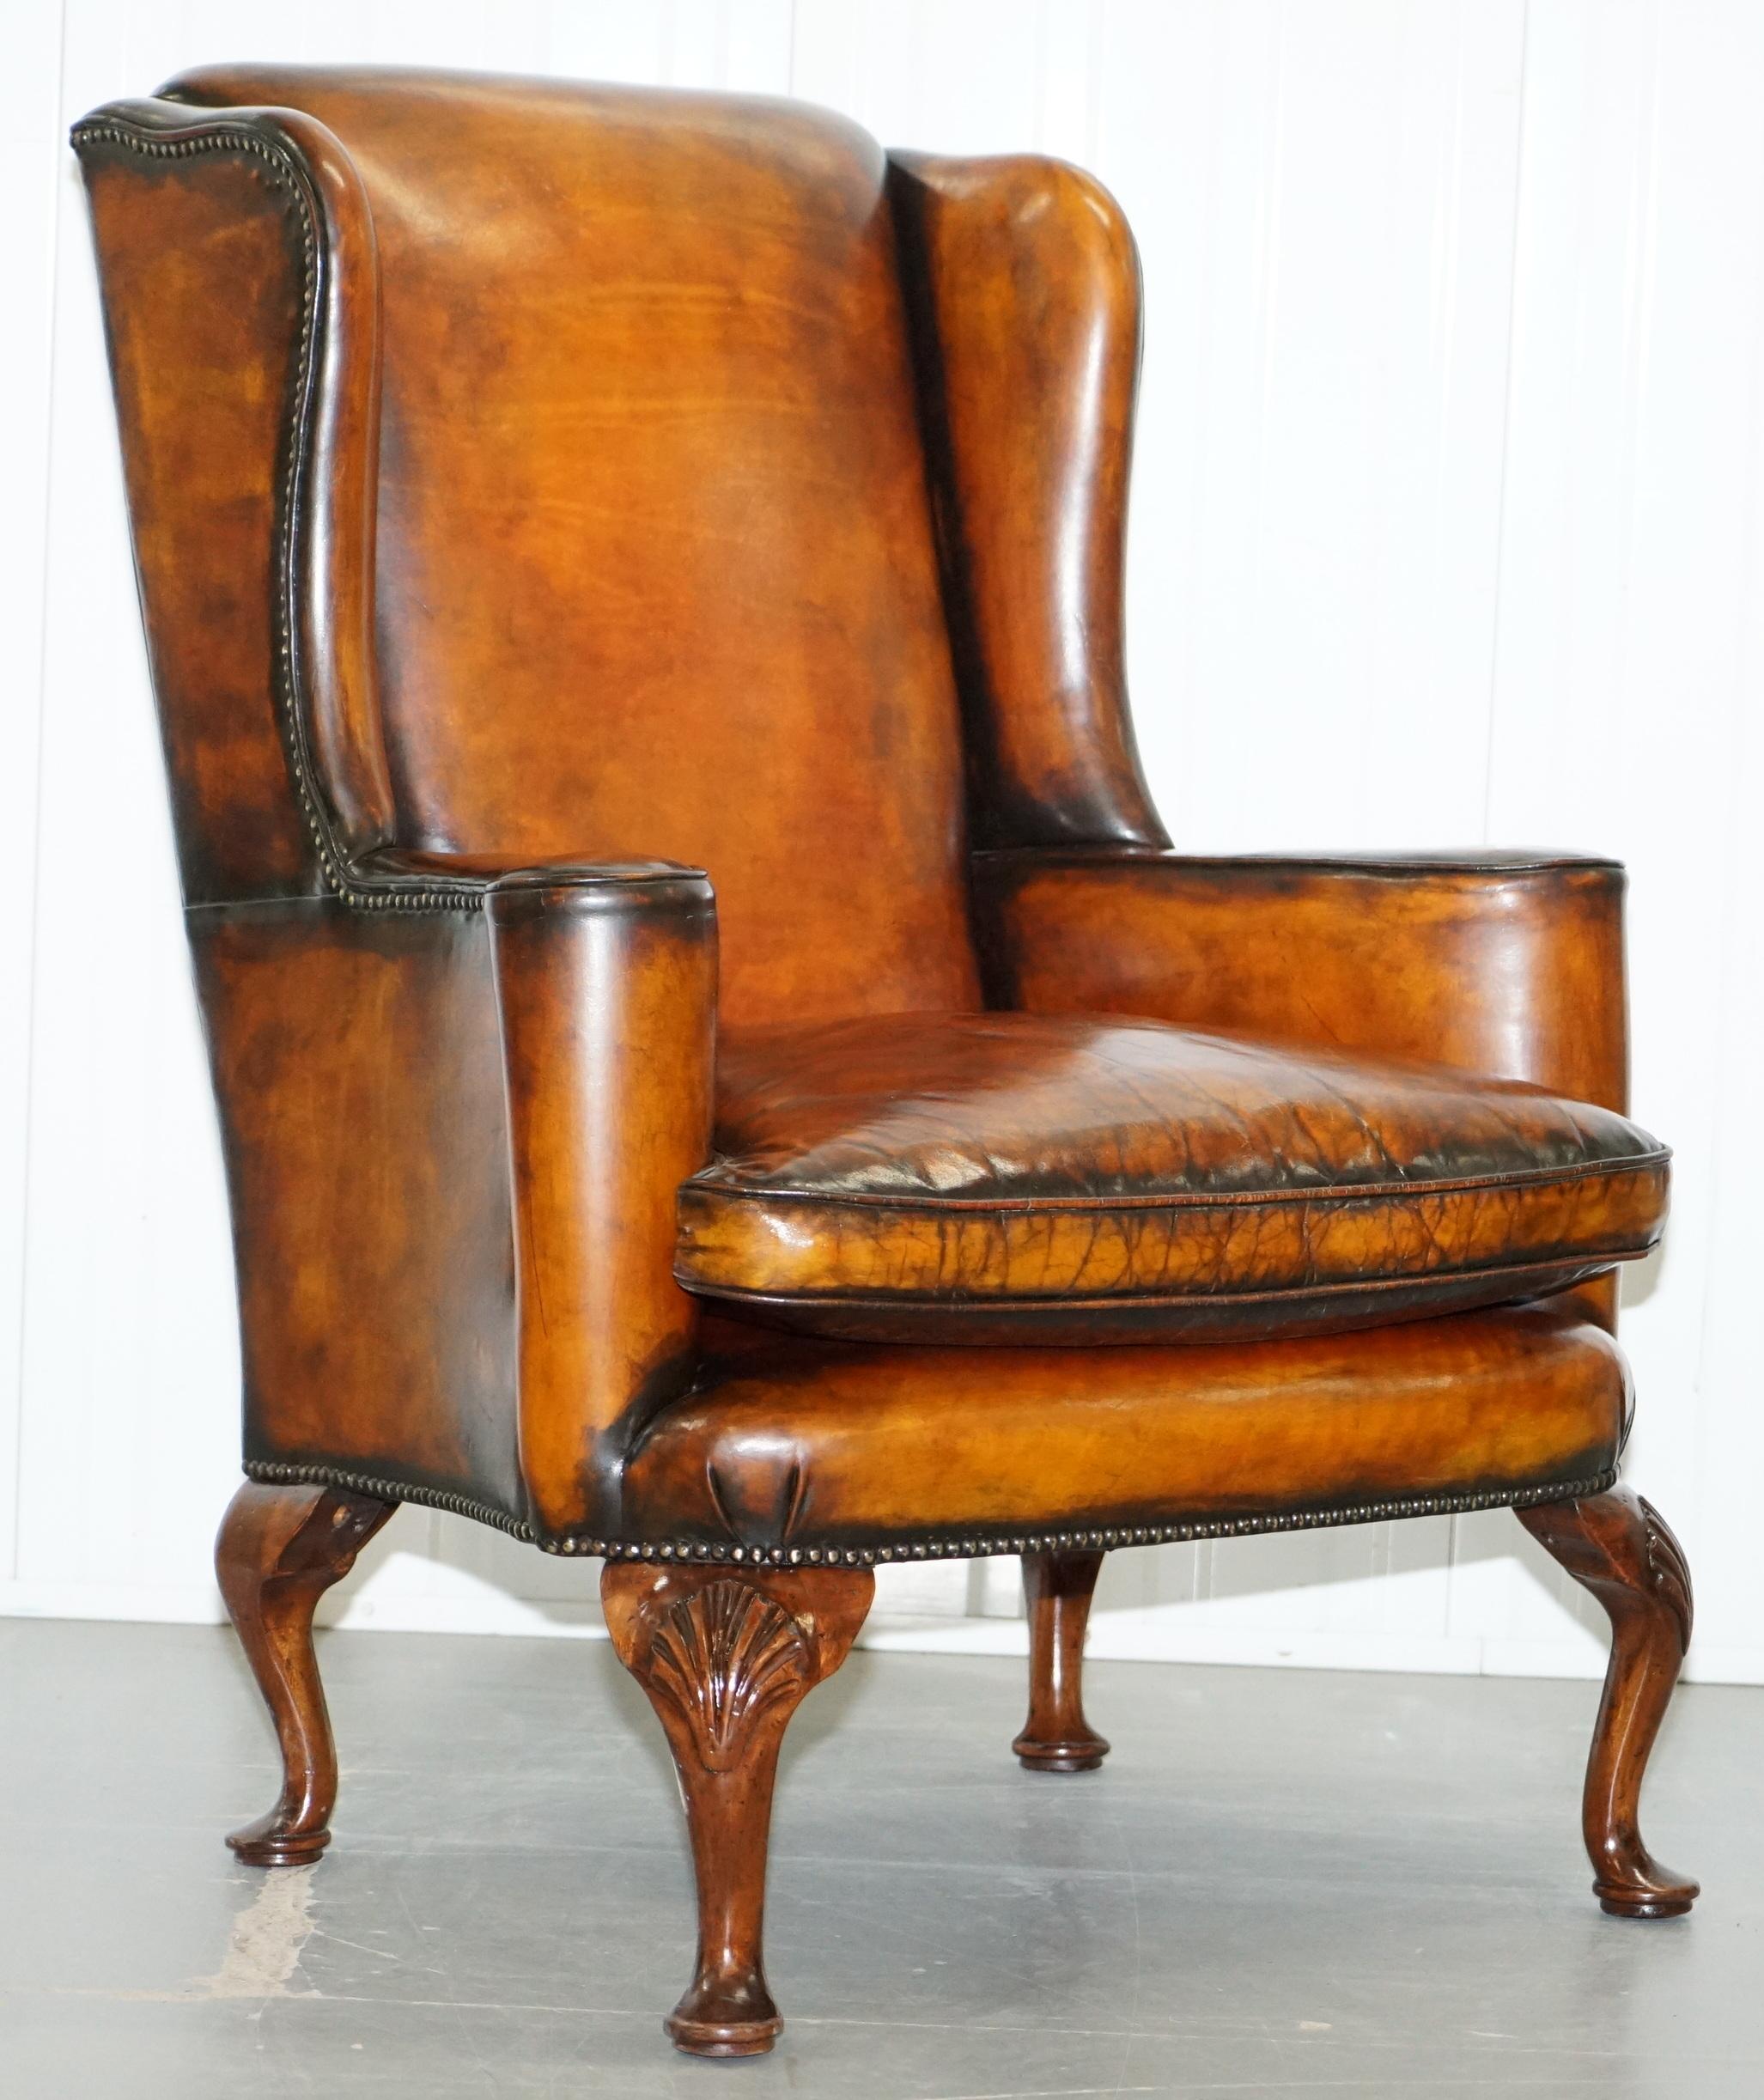 We are delighted to offer for sale this stunning and very rare pair of George III 18th century style fully restored brown leather wingback armchairs

A simply glorious pair, the frames have the traditional George III flat top arms, they are the